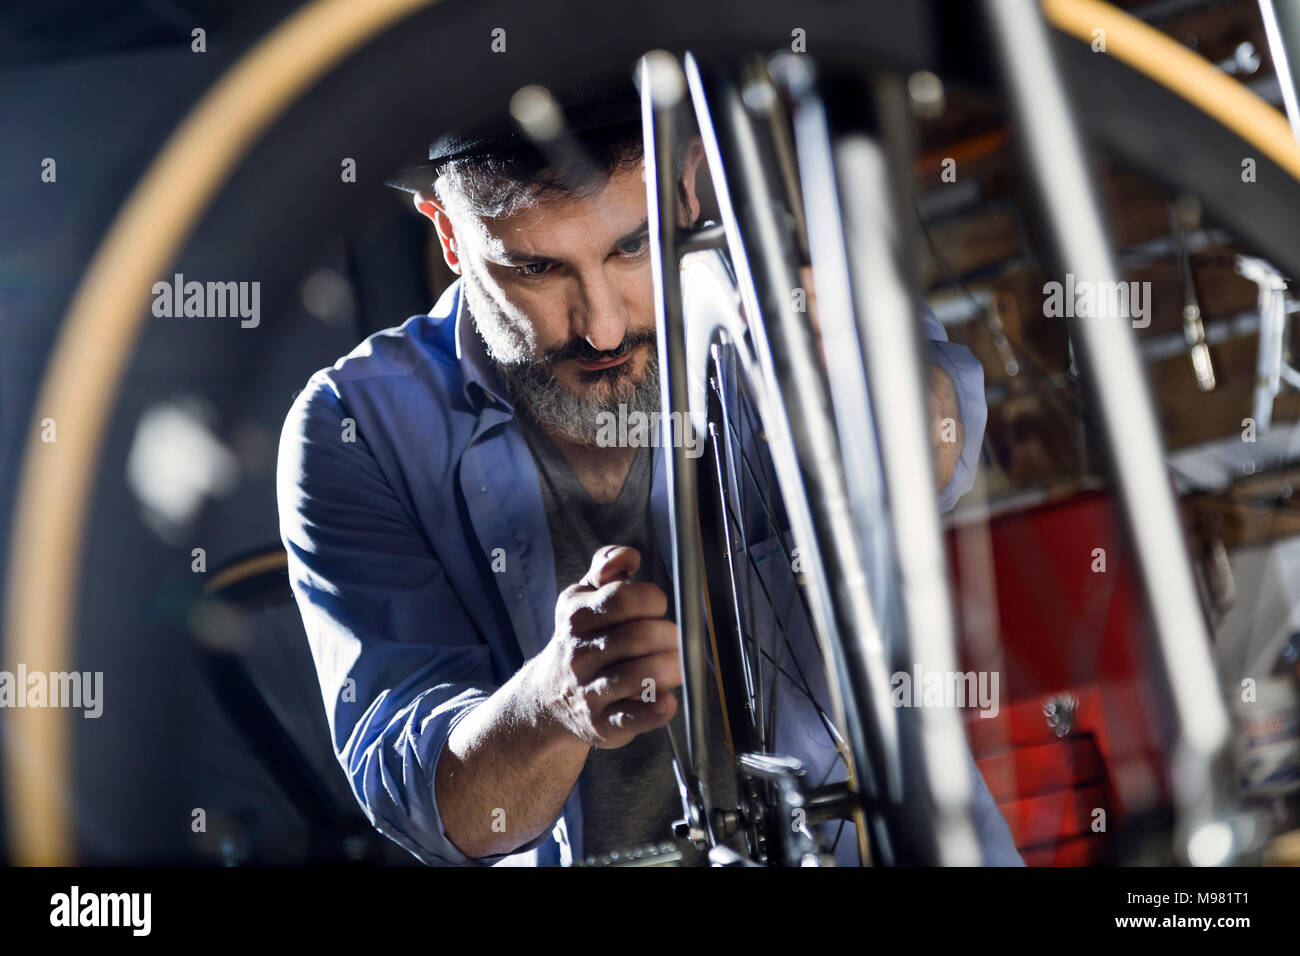 Man working on bicycle in workshop Stock Photo